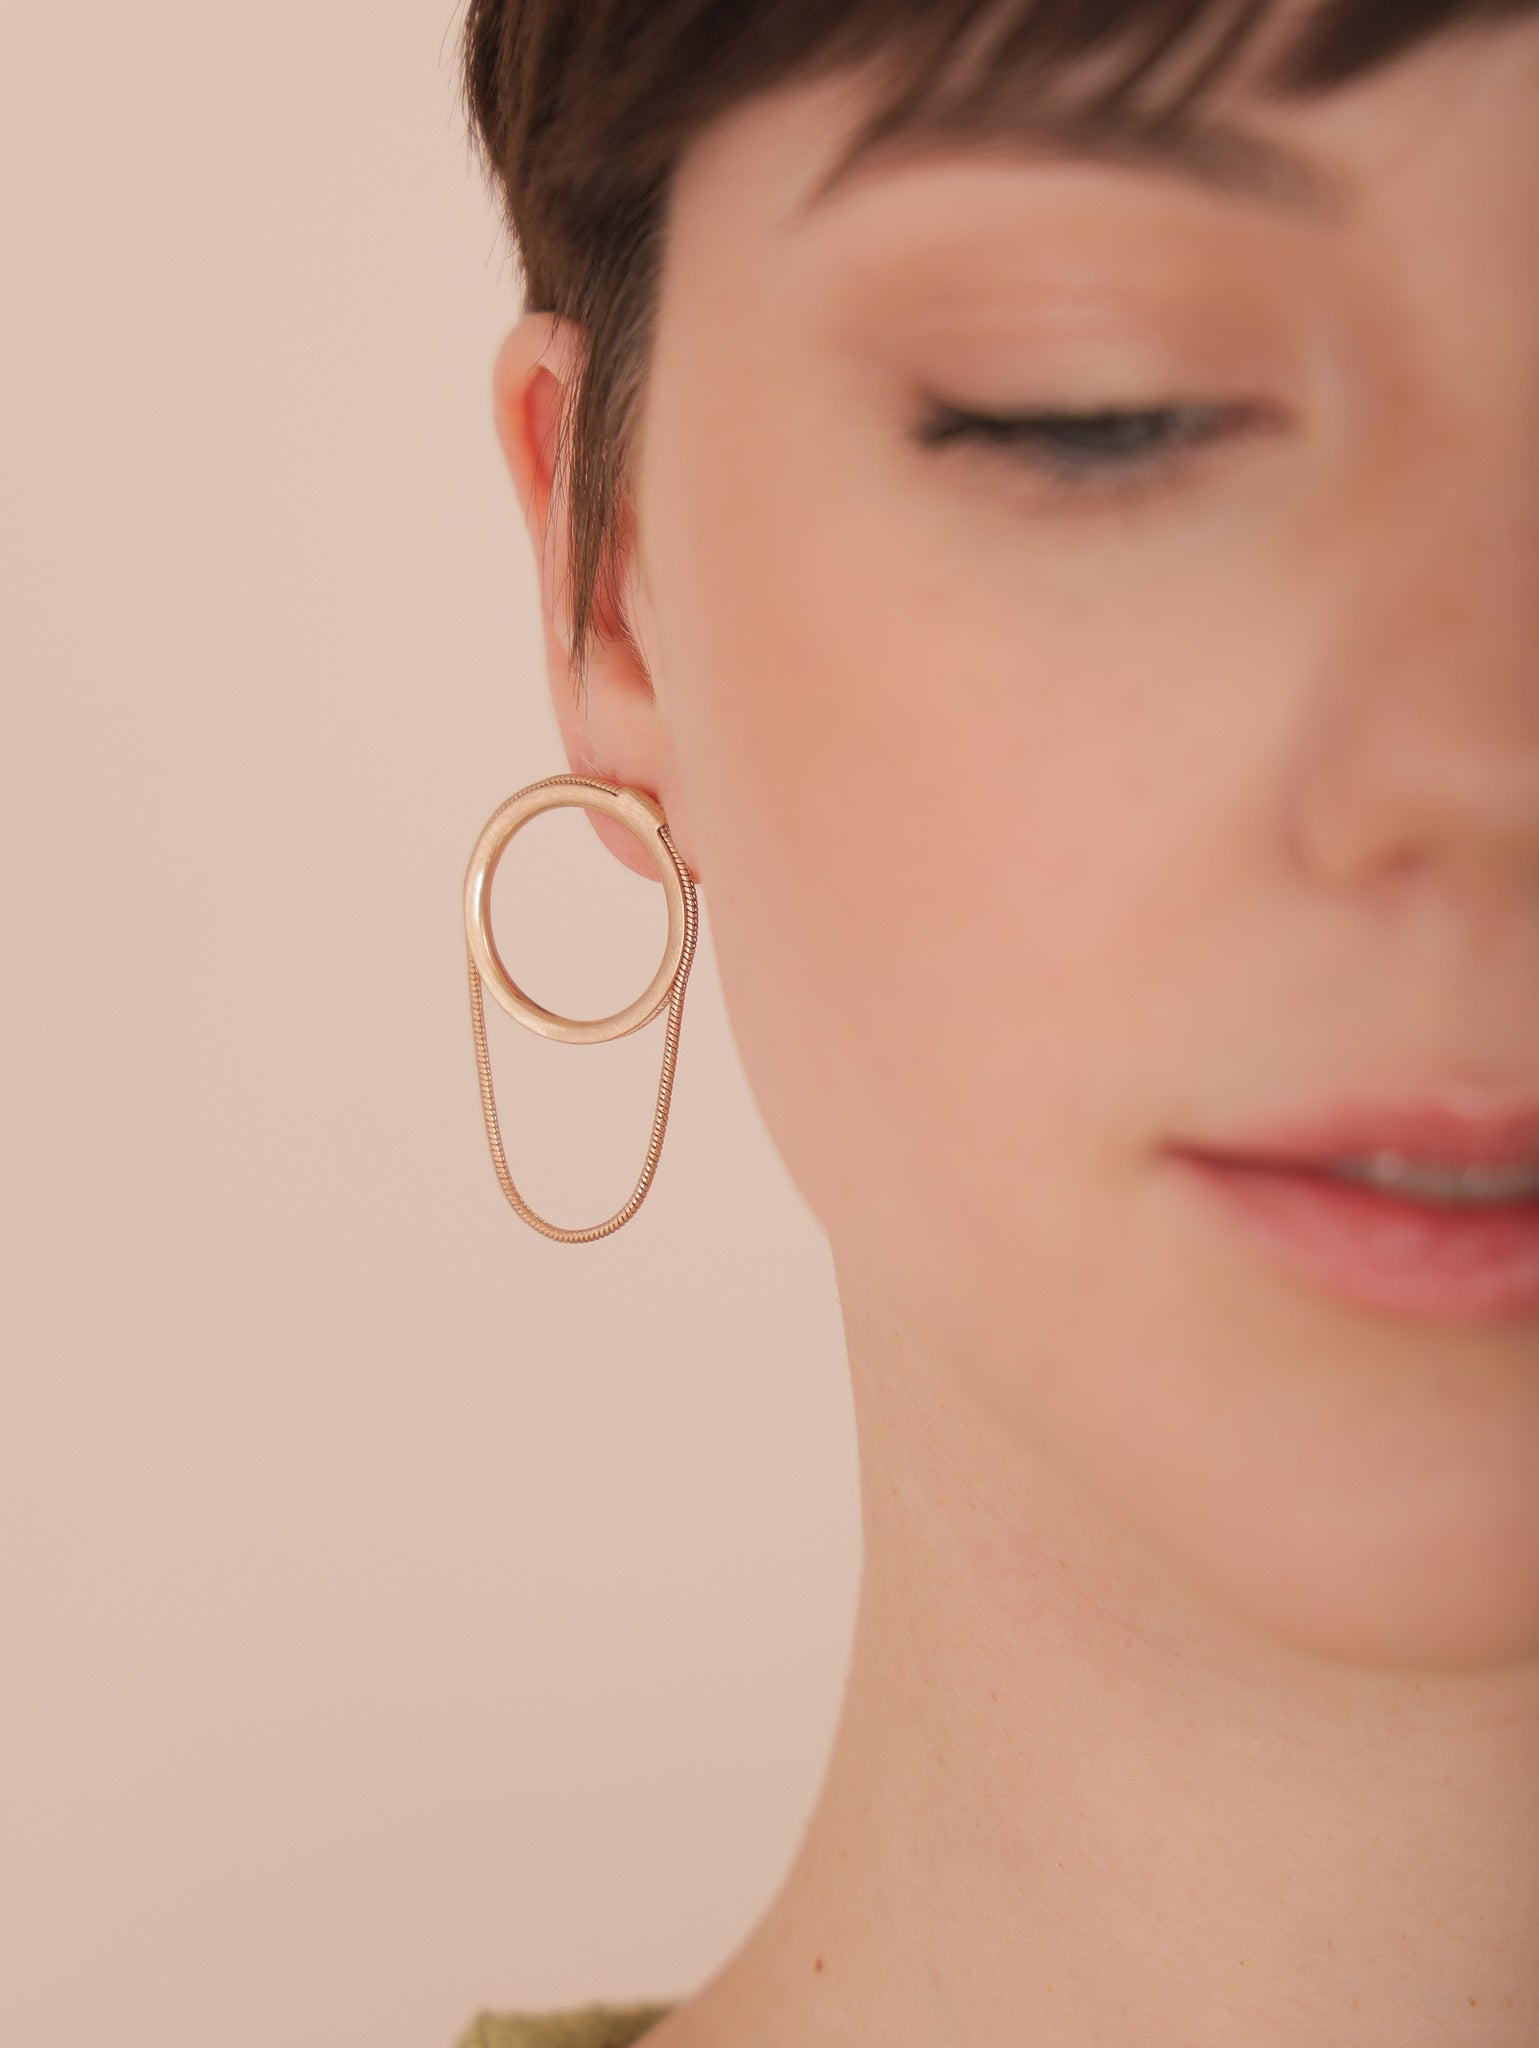 Molly Green - Around That Time Earrings - Jewelry